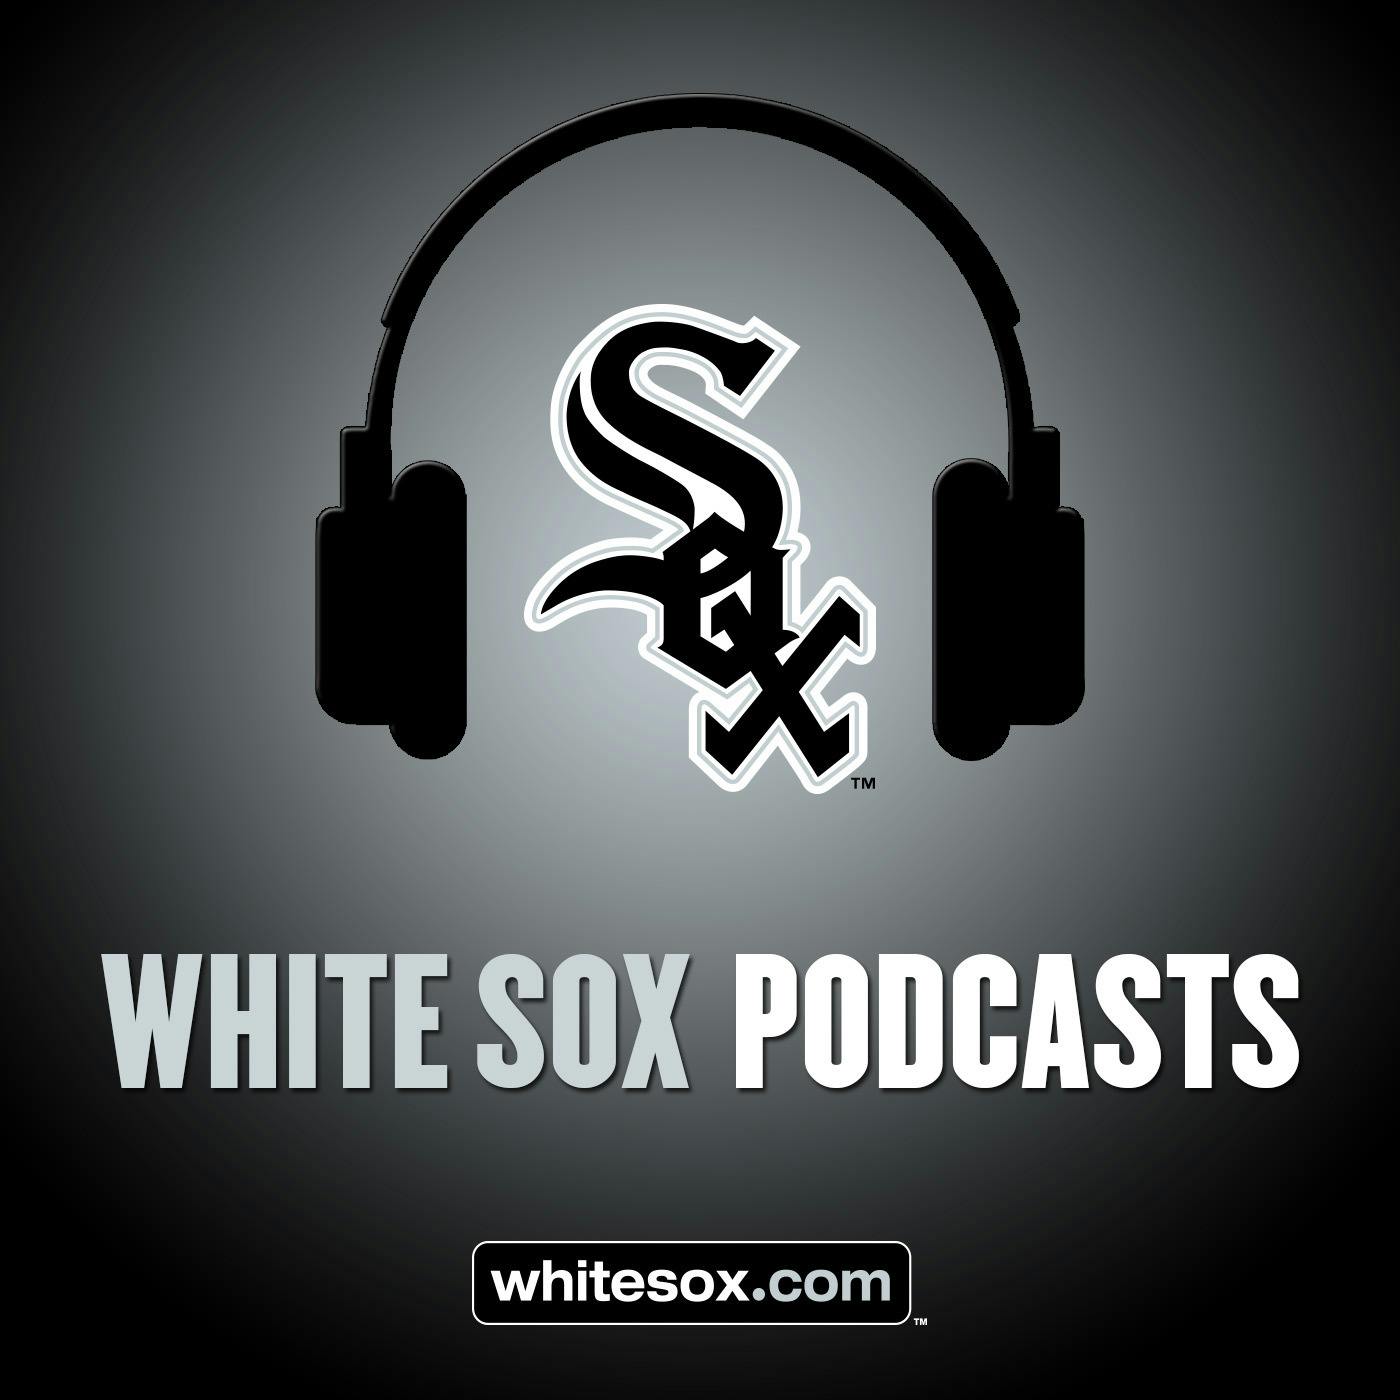 2/22/20: White Sox Weekly